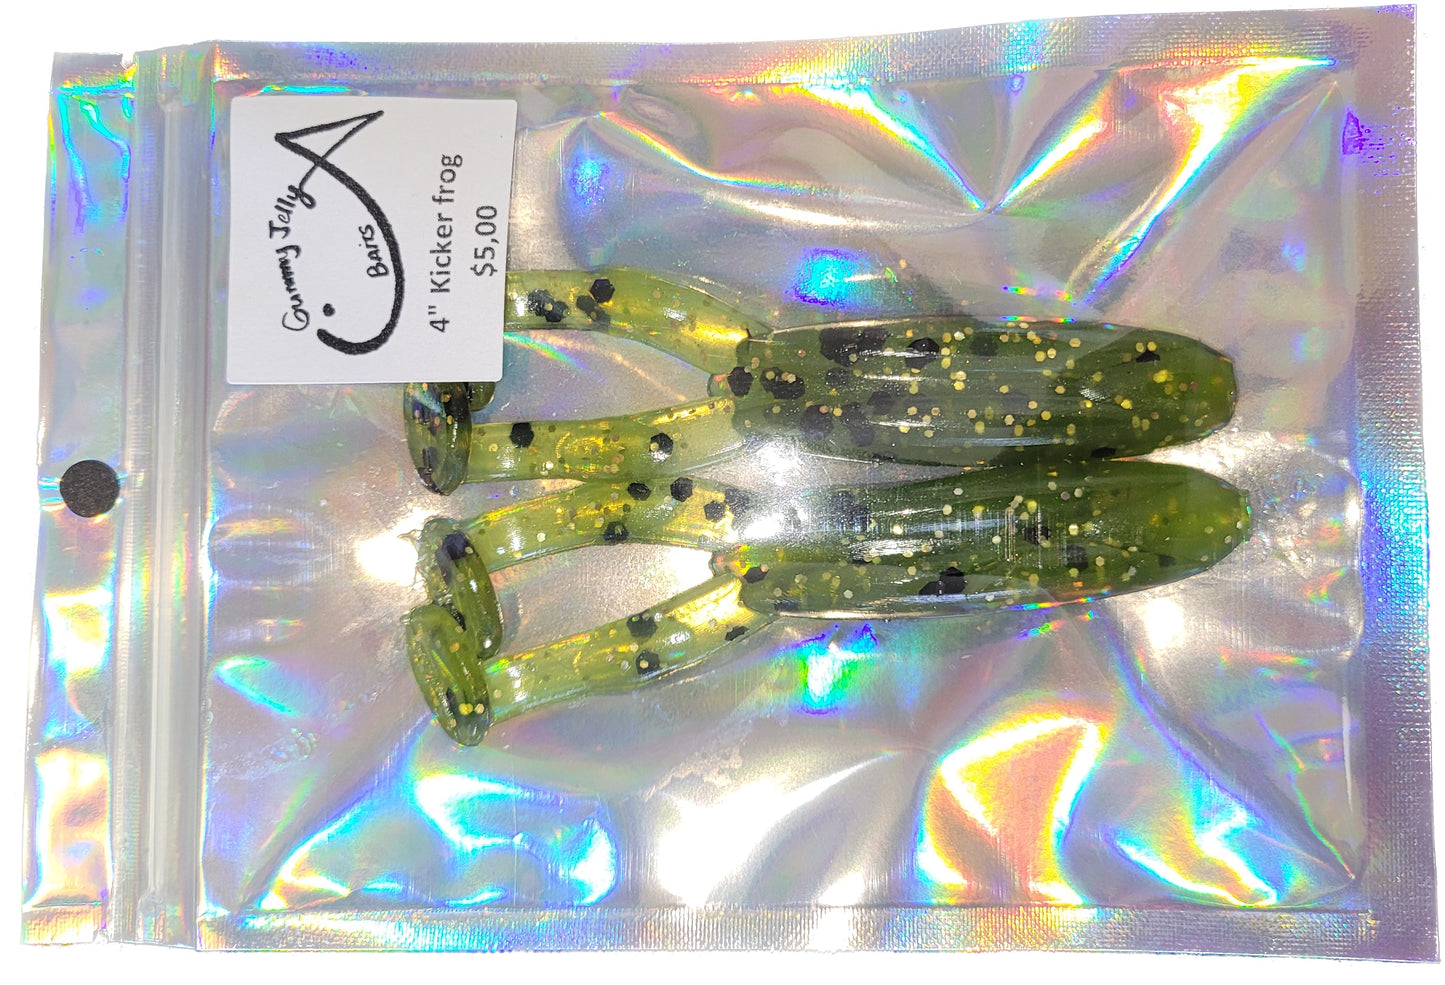 Kicker Frog 4 “ - Baby bass gold – The Gummy Jelly Co